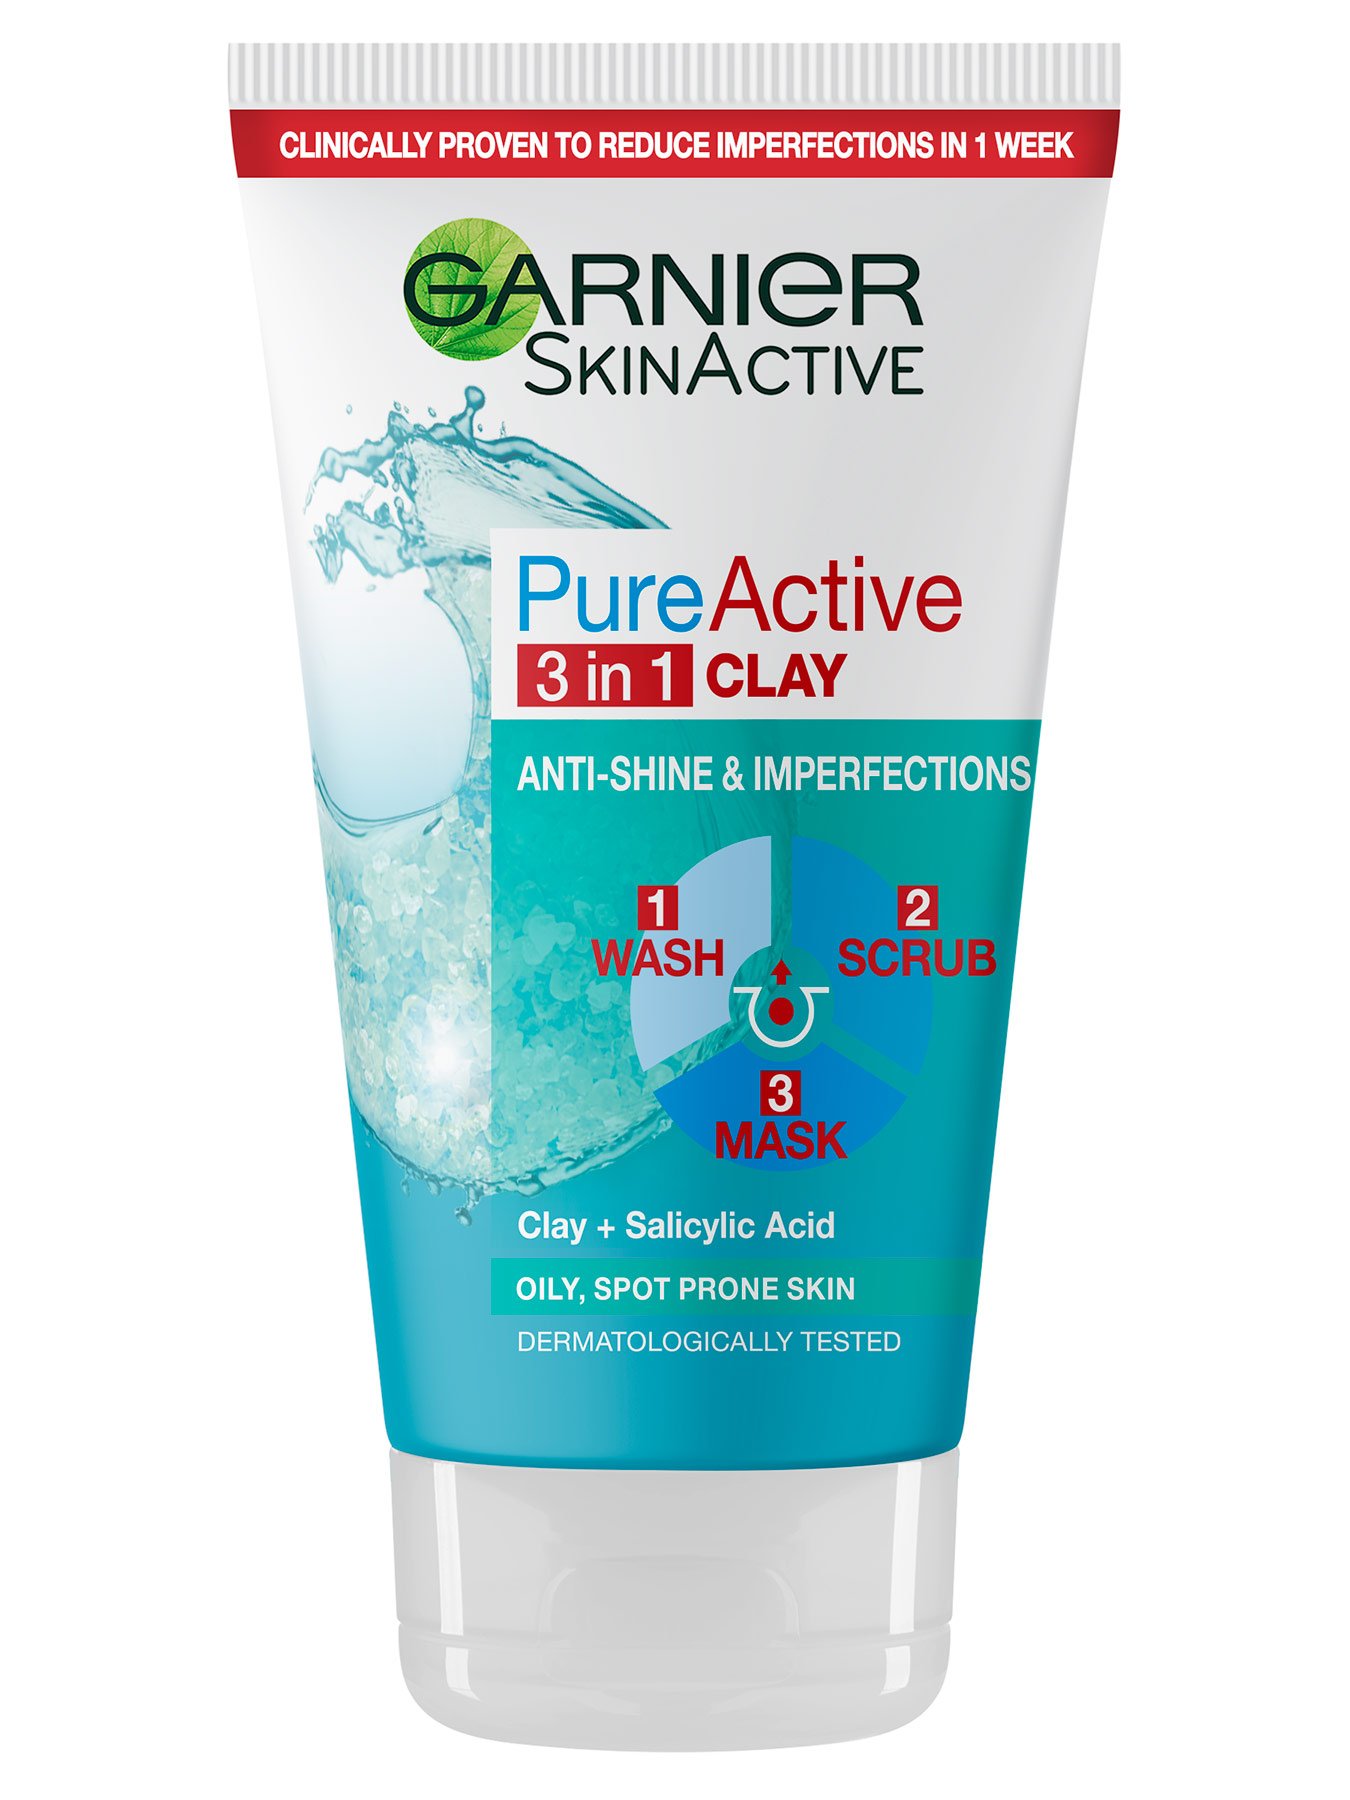 Pure Active 3in1 Clay Media Library